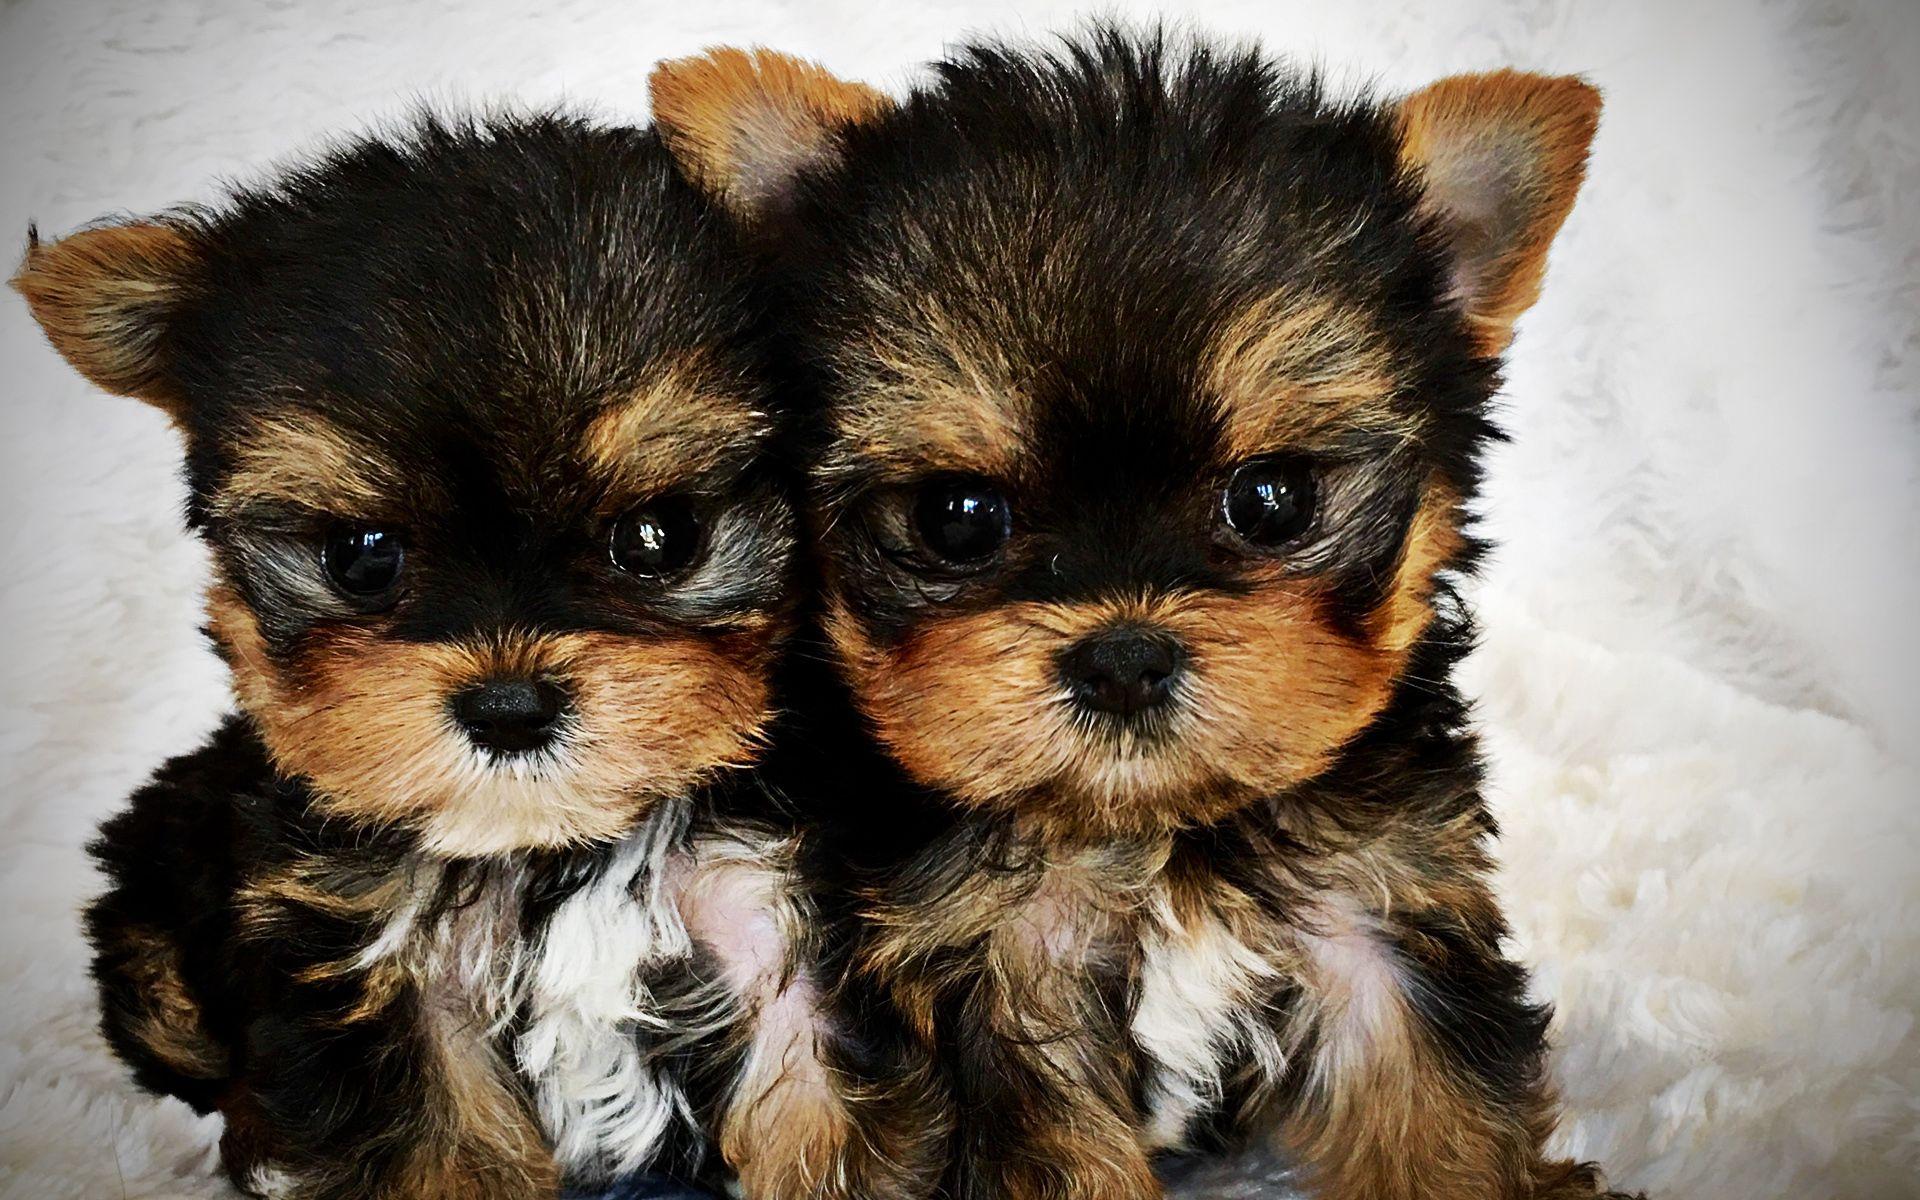 Download Wallpaper Yorkshire Terrier, Puppies, Cute Dog, Twins, Yorkie, Close Up, Fluffy Dog, Dogs, Cute Animals, Pets, Yorkshire Terrier Dog For Desktop With Resolution 1920x1200. High Quality HD Picture Wallpaper